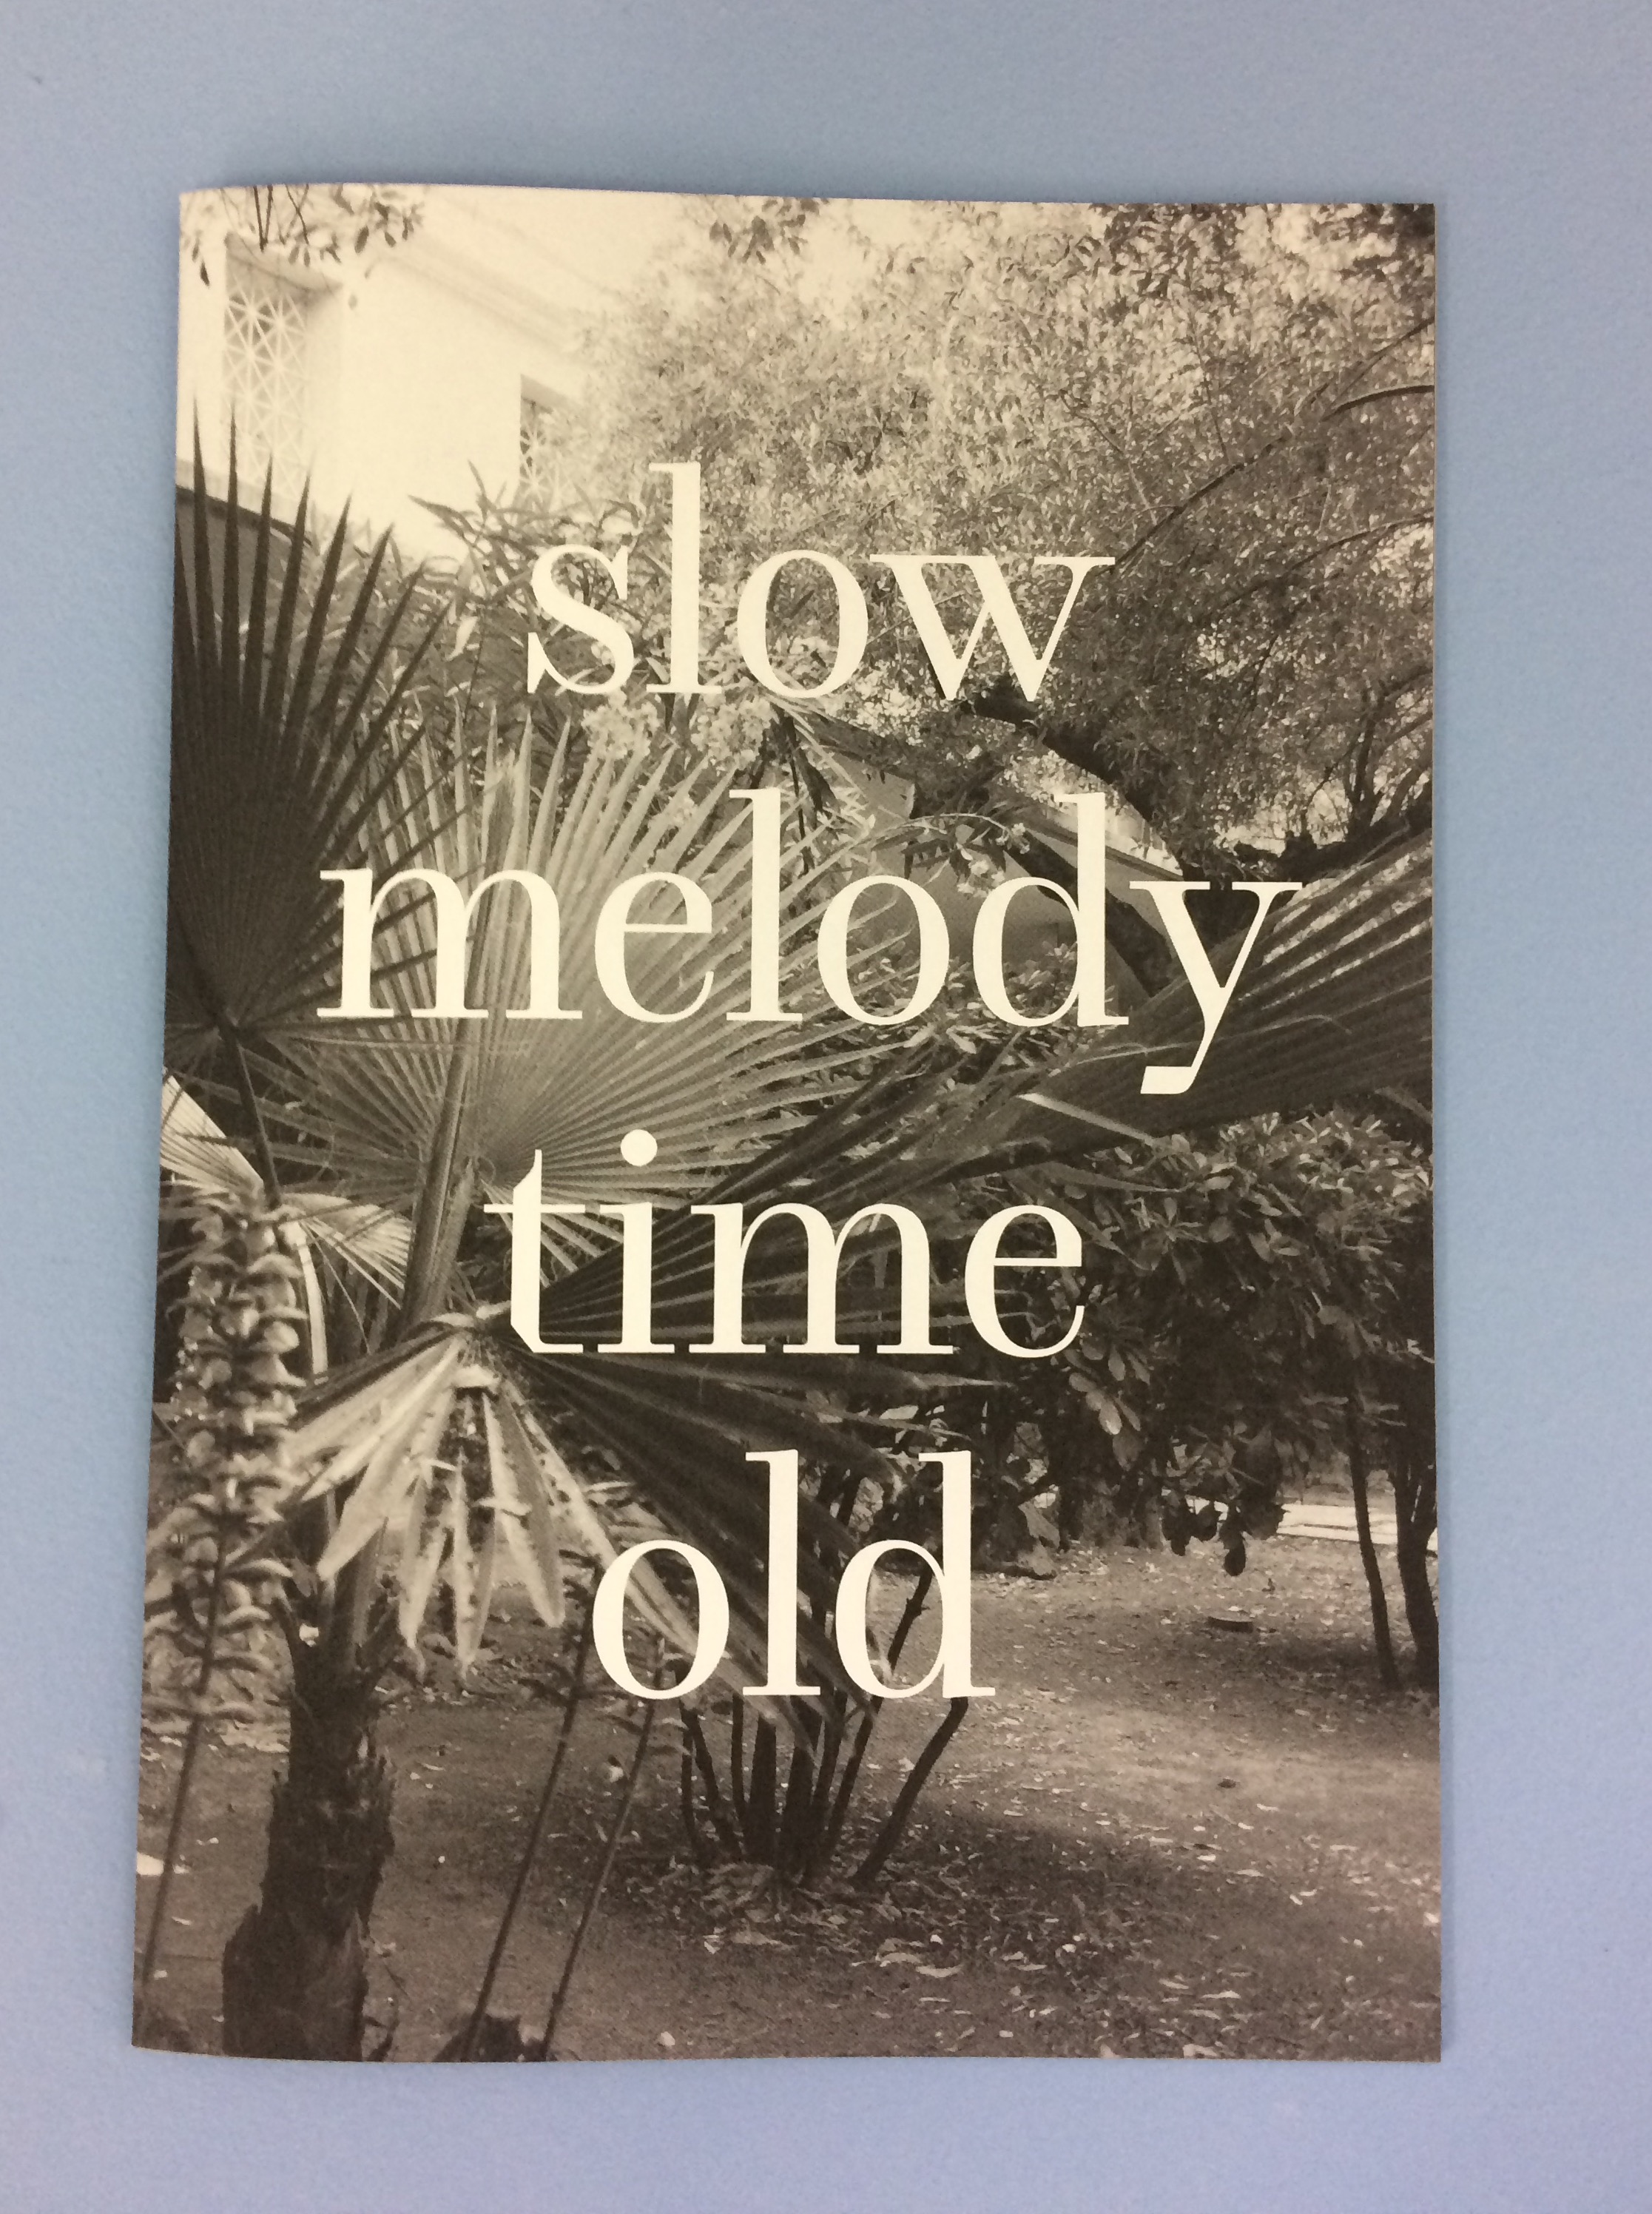 Slow Melody Time Old